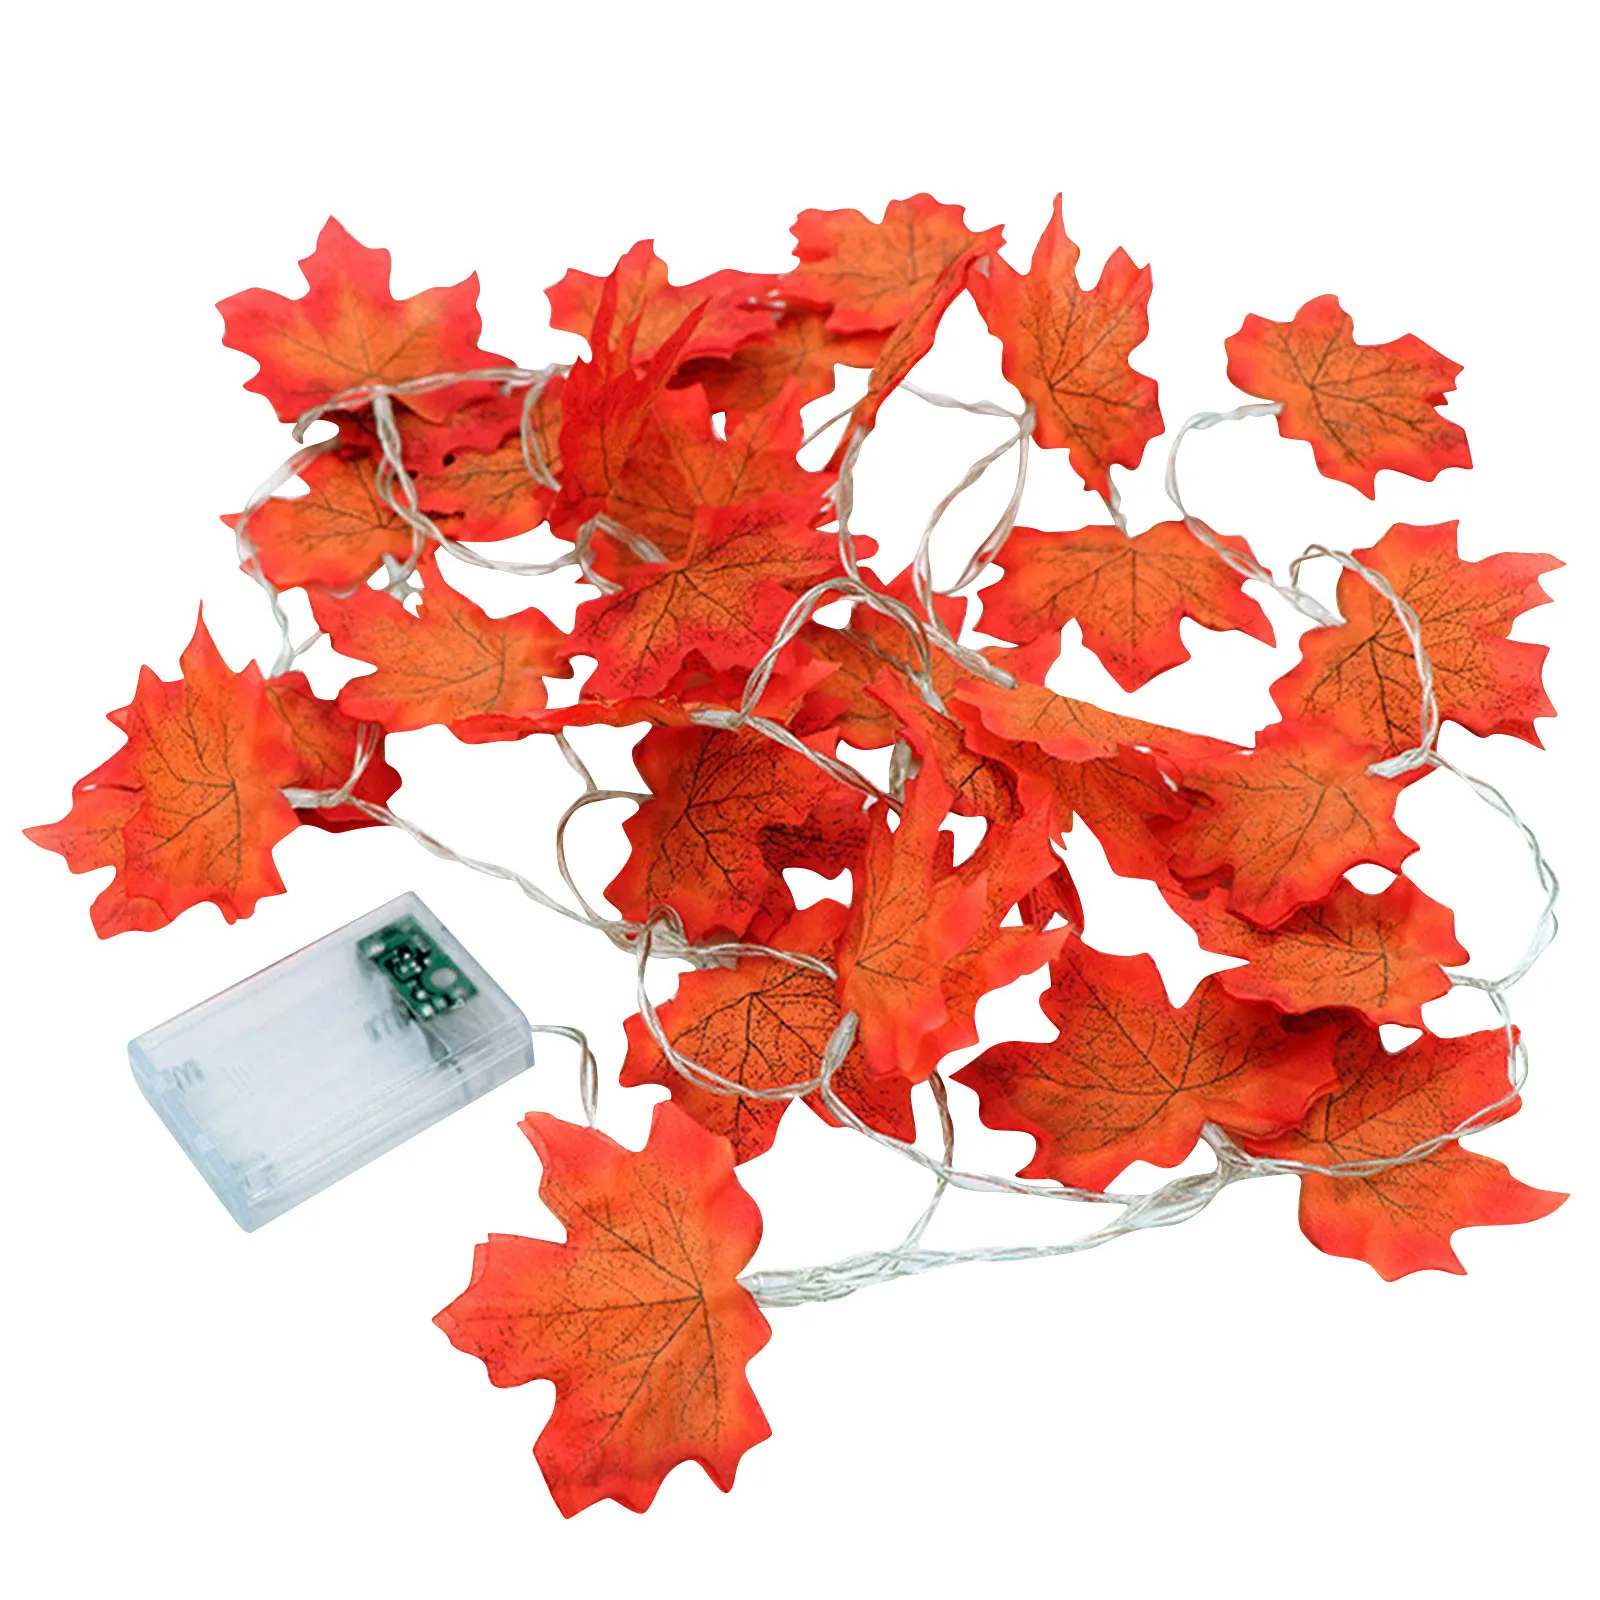 

5m 50led Halloween String Light Artificial Autumn Maple Leaves Pumpkin Fairy Garland Lamps Festival Party Thanksgiving Day Decor